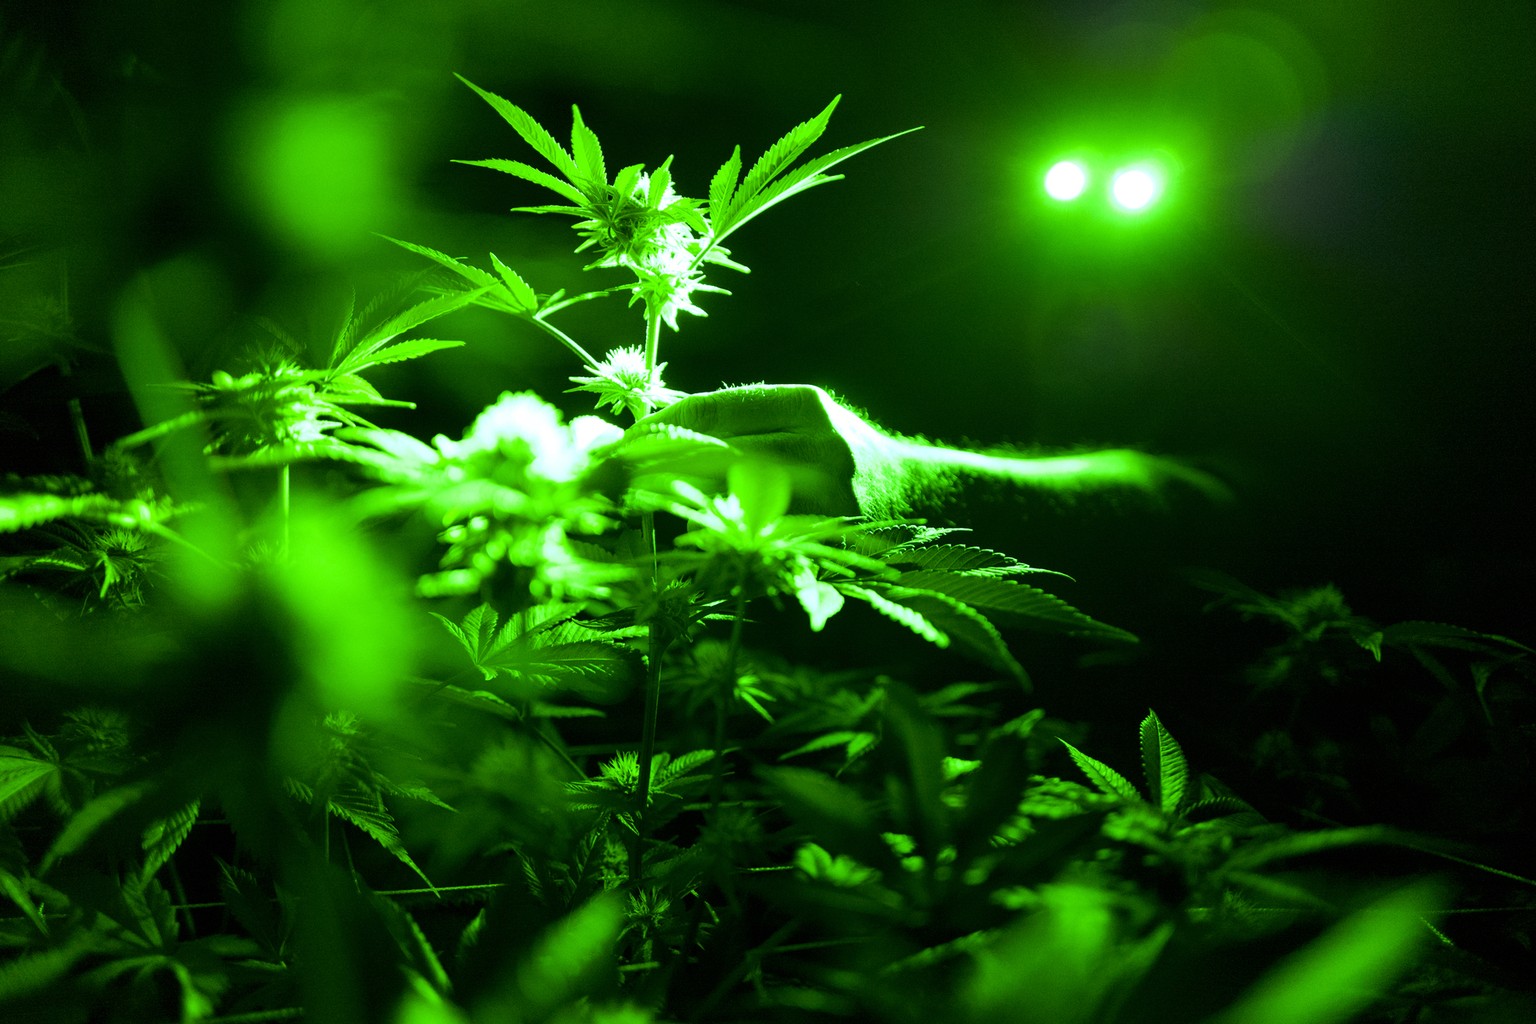 FILE - This May 20, 2019, file photo shows marijuana plants in a grow room using green lights during their night cycle in Gardena, Calif. An alliance of large cannabis businesses in the growing global ...